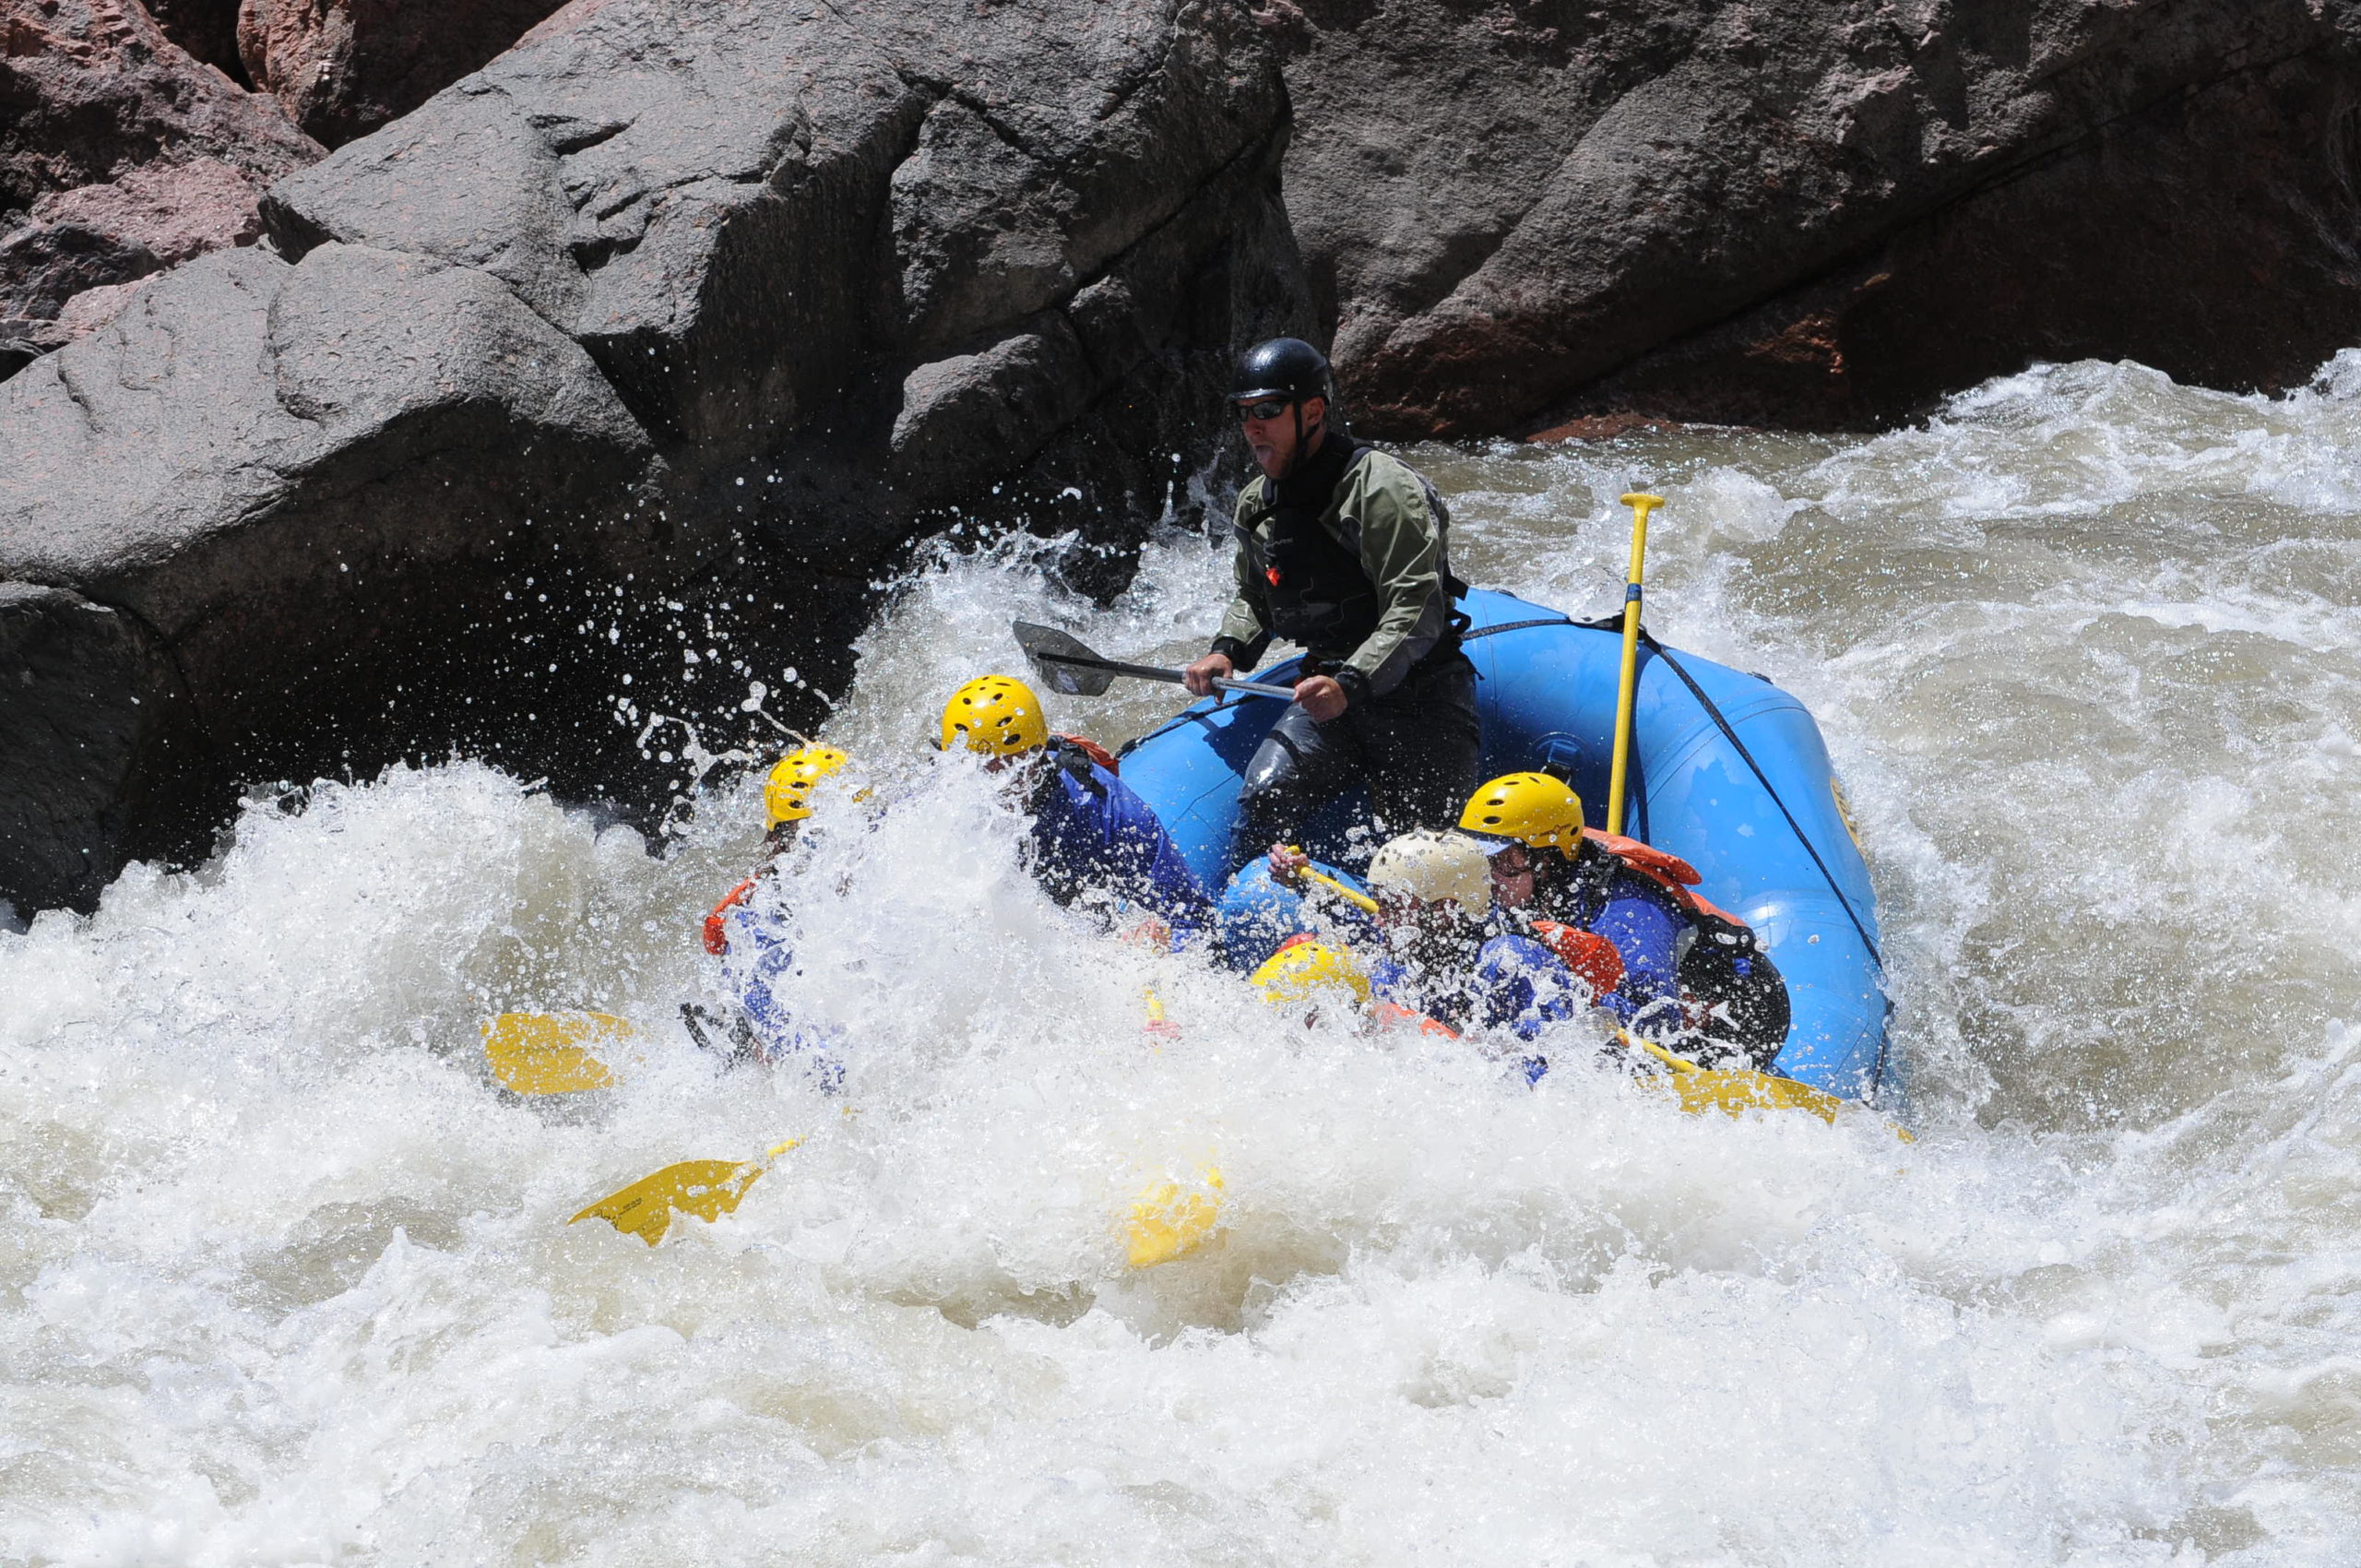 Royal Gorge River Trip – What To Expect